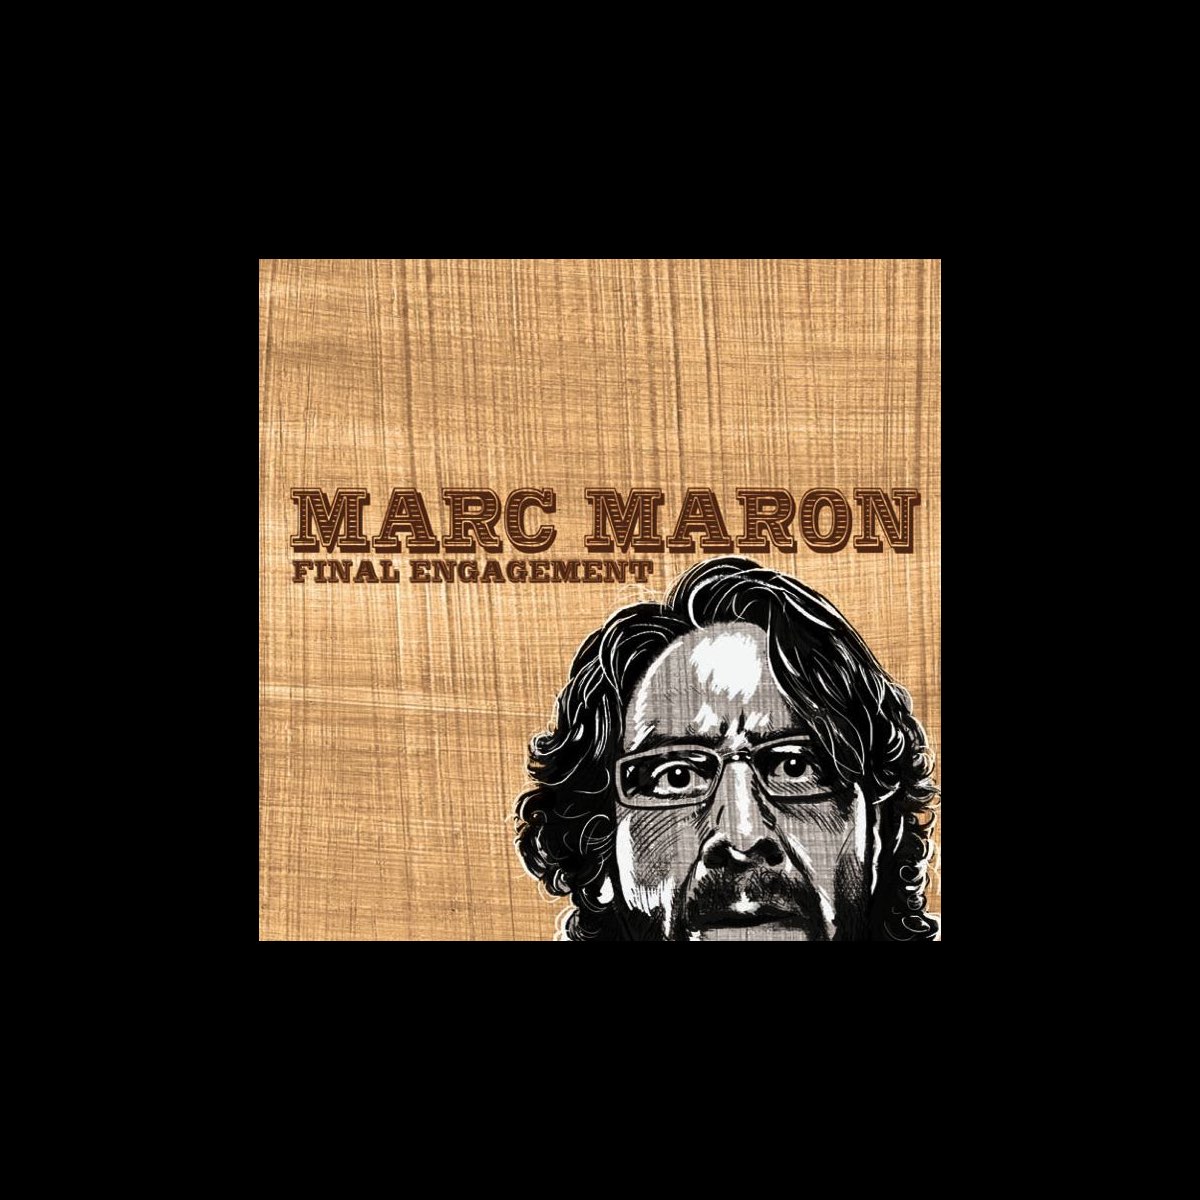 Final Engagement by Marc Maron on Apple Music